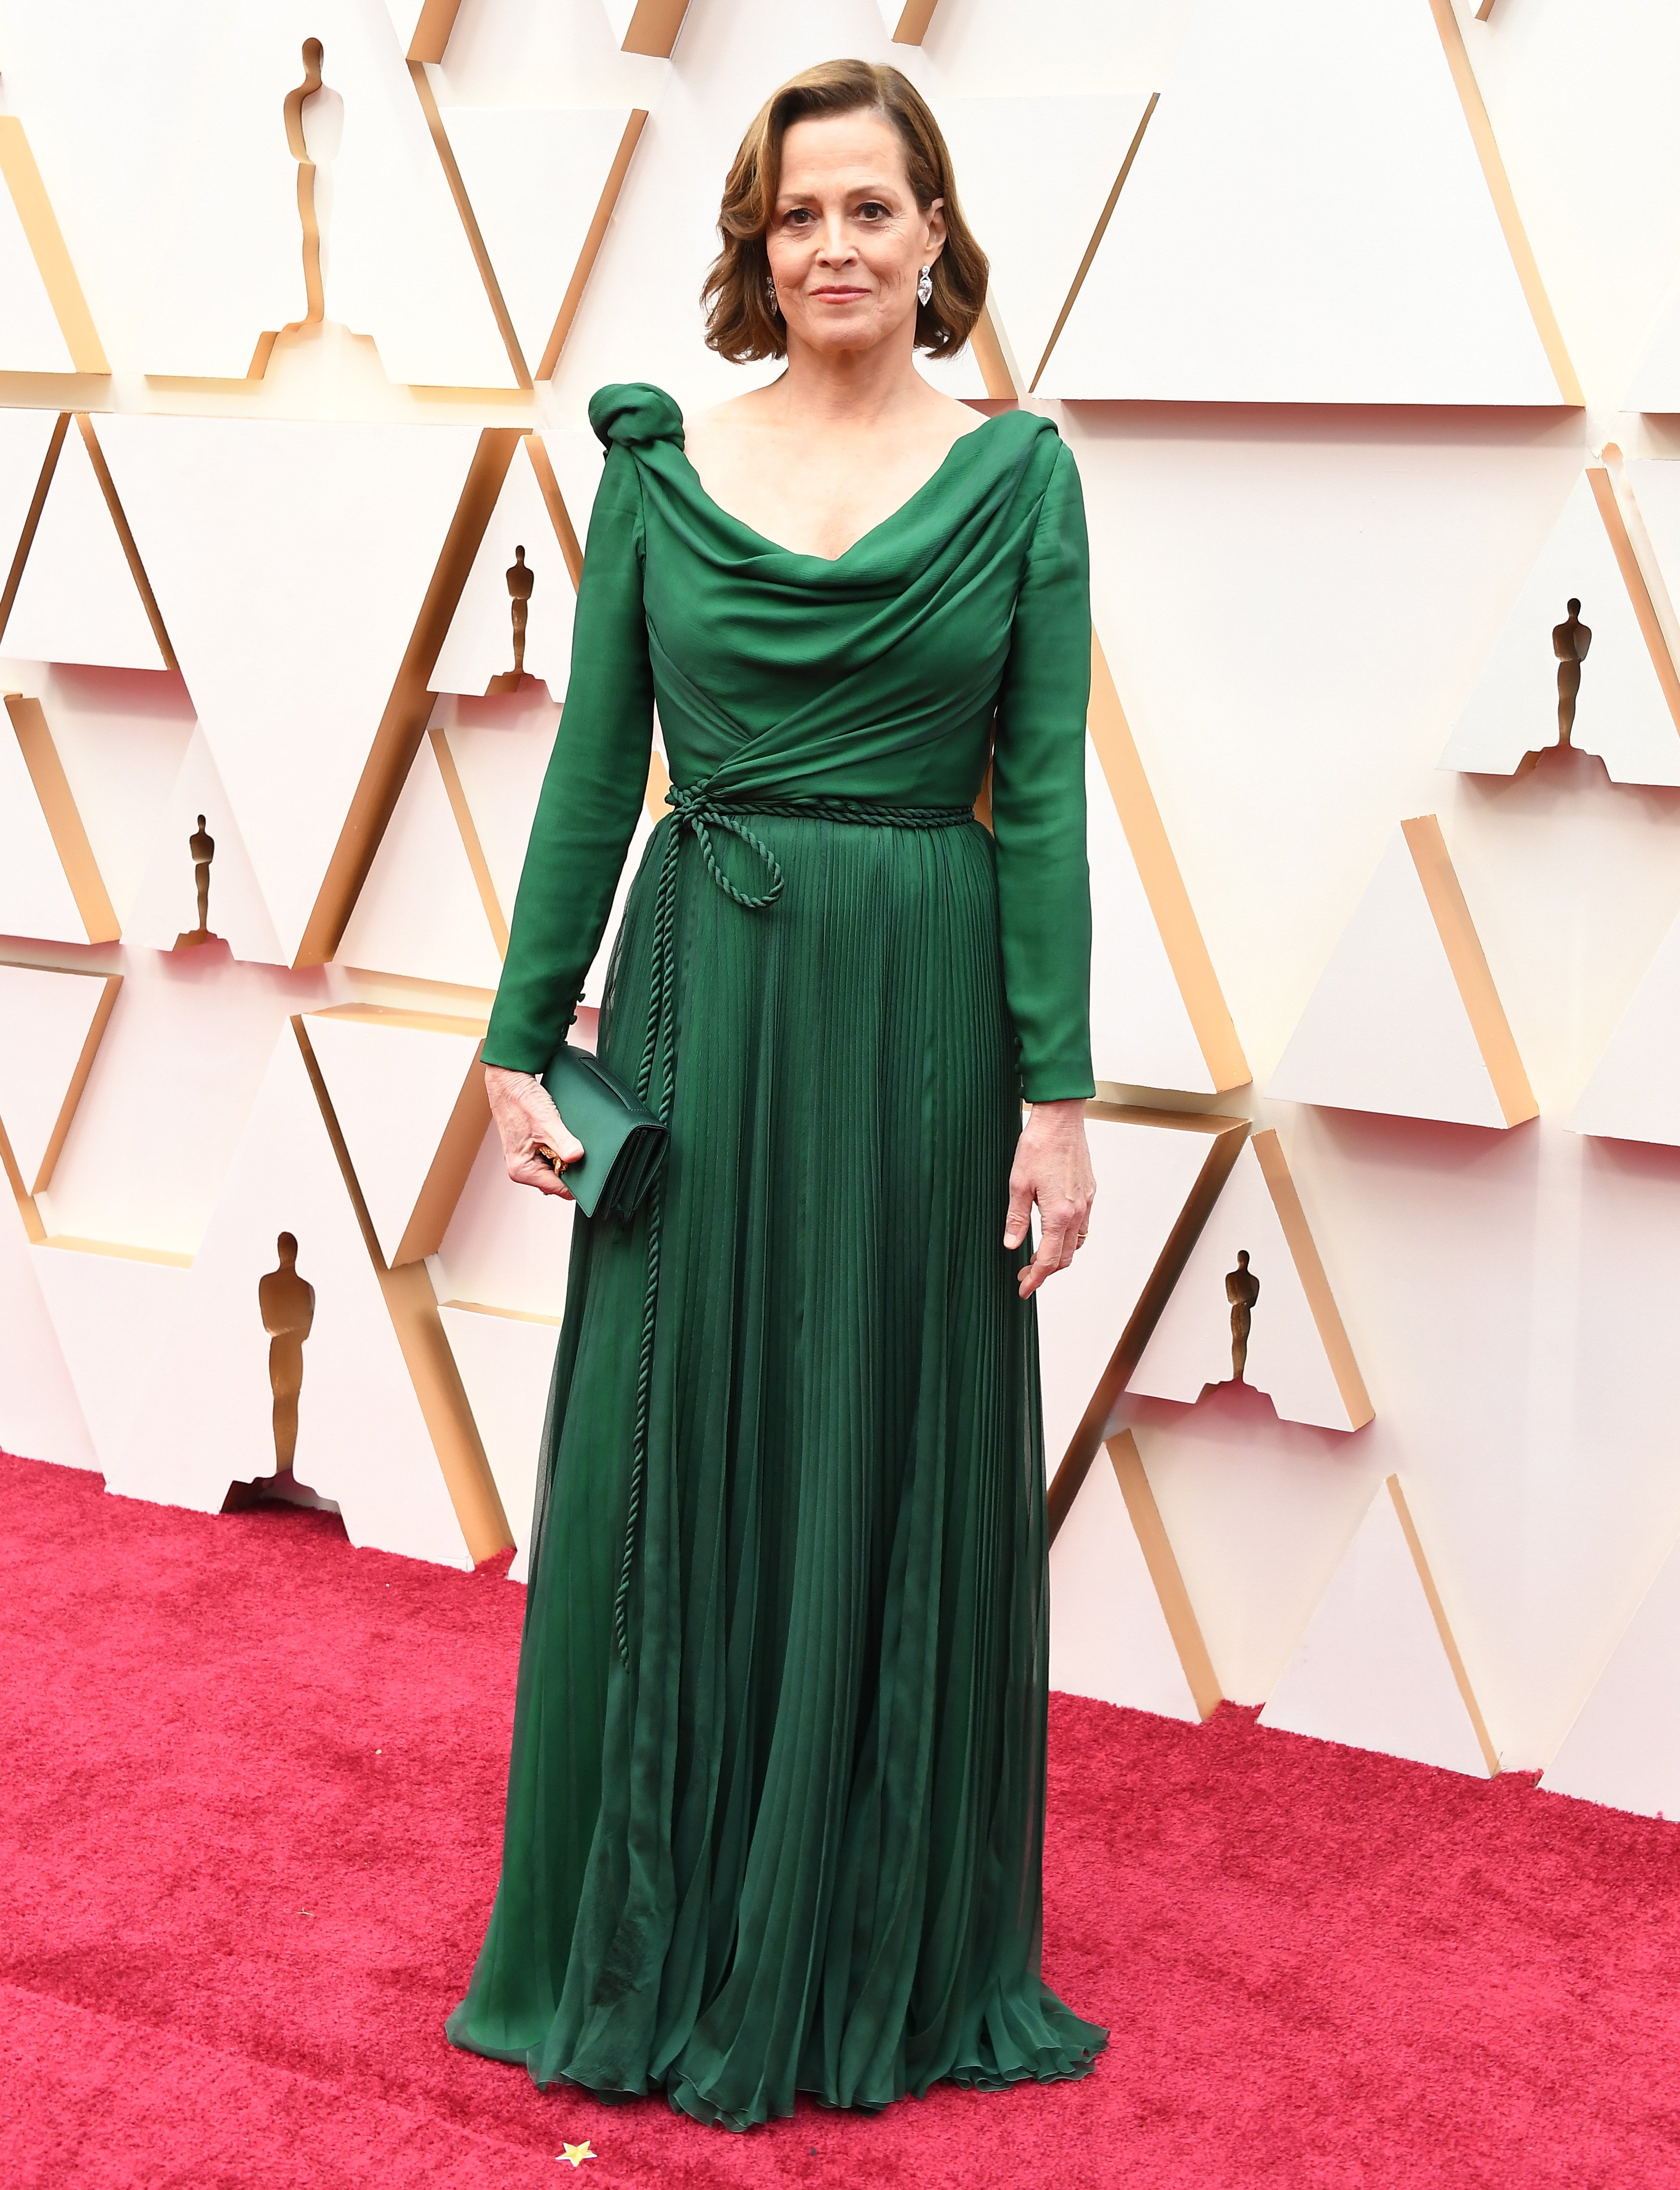 Sigourney Weaver at the Oscars on February 09, 2020 in Hollywood, California | Photo: Getty Images